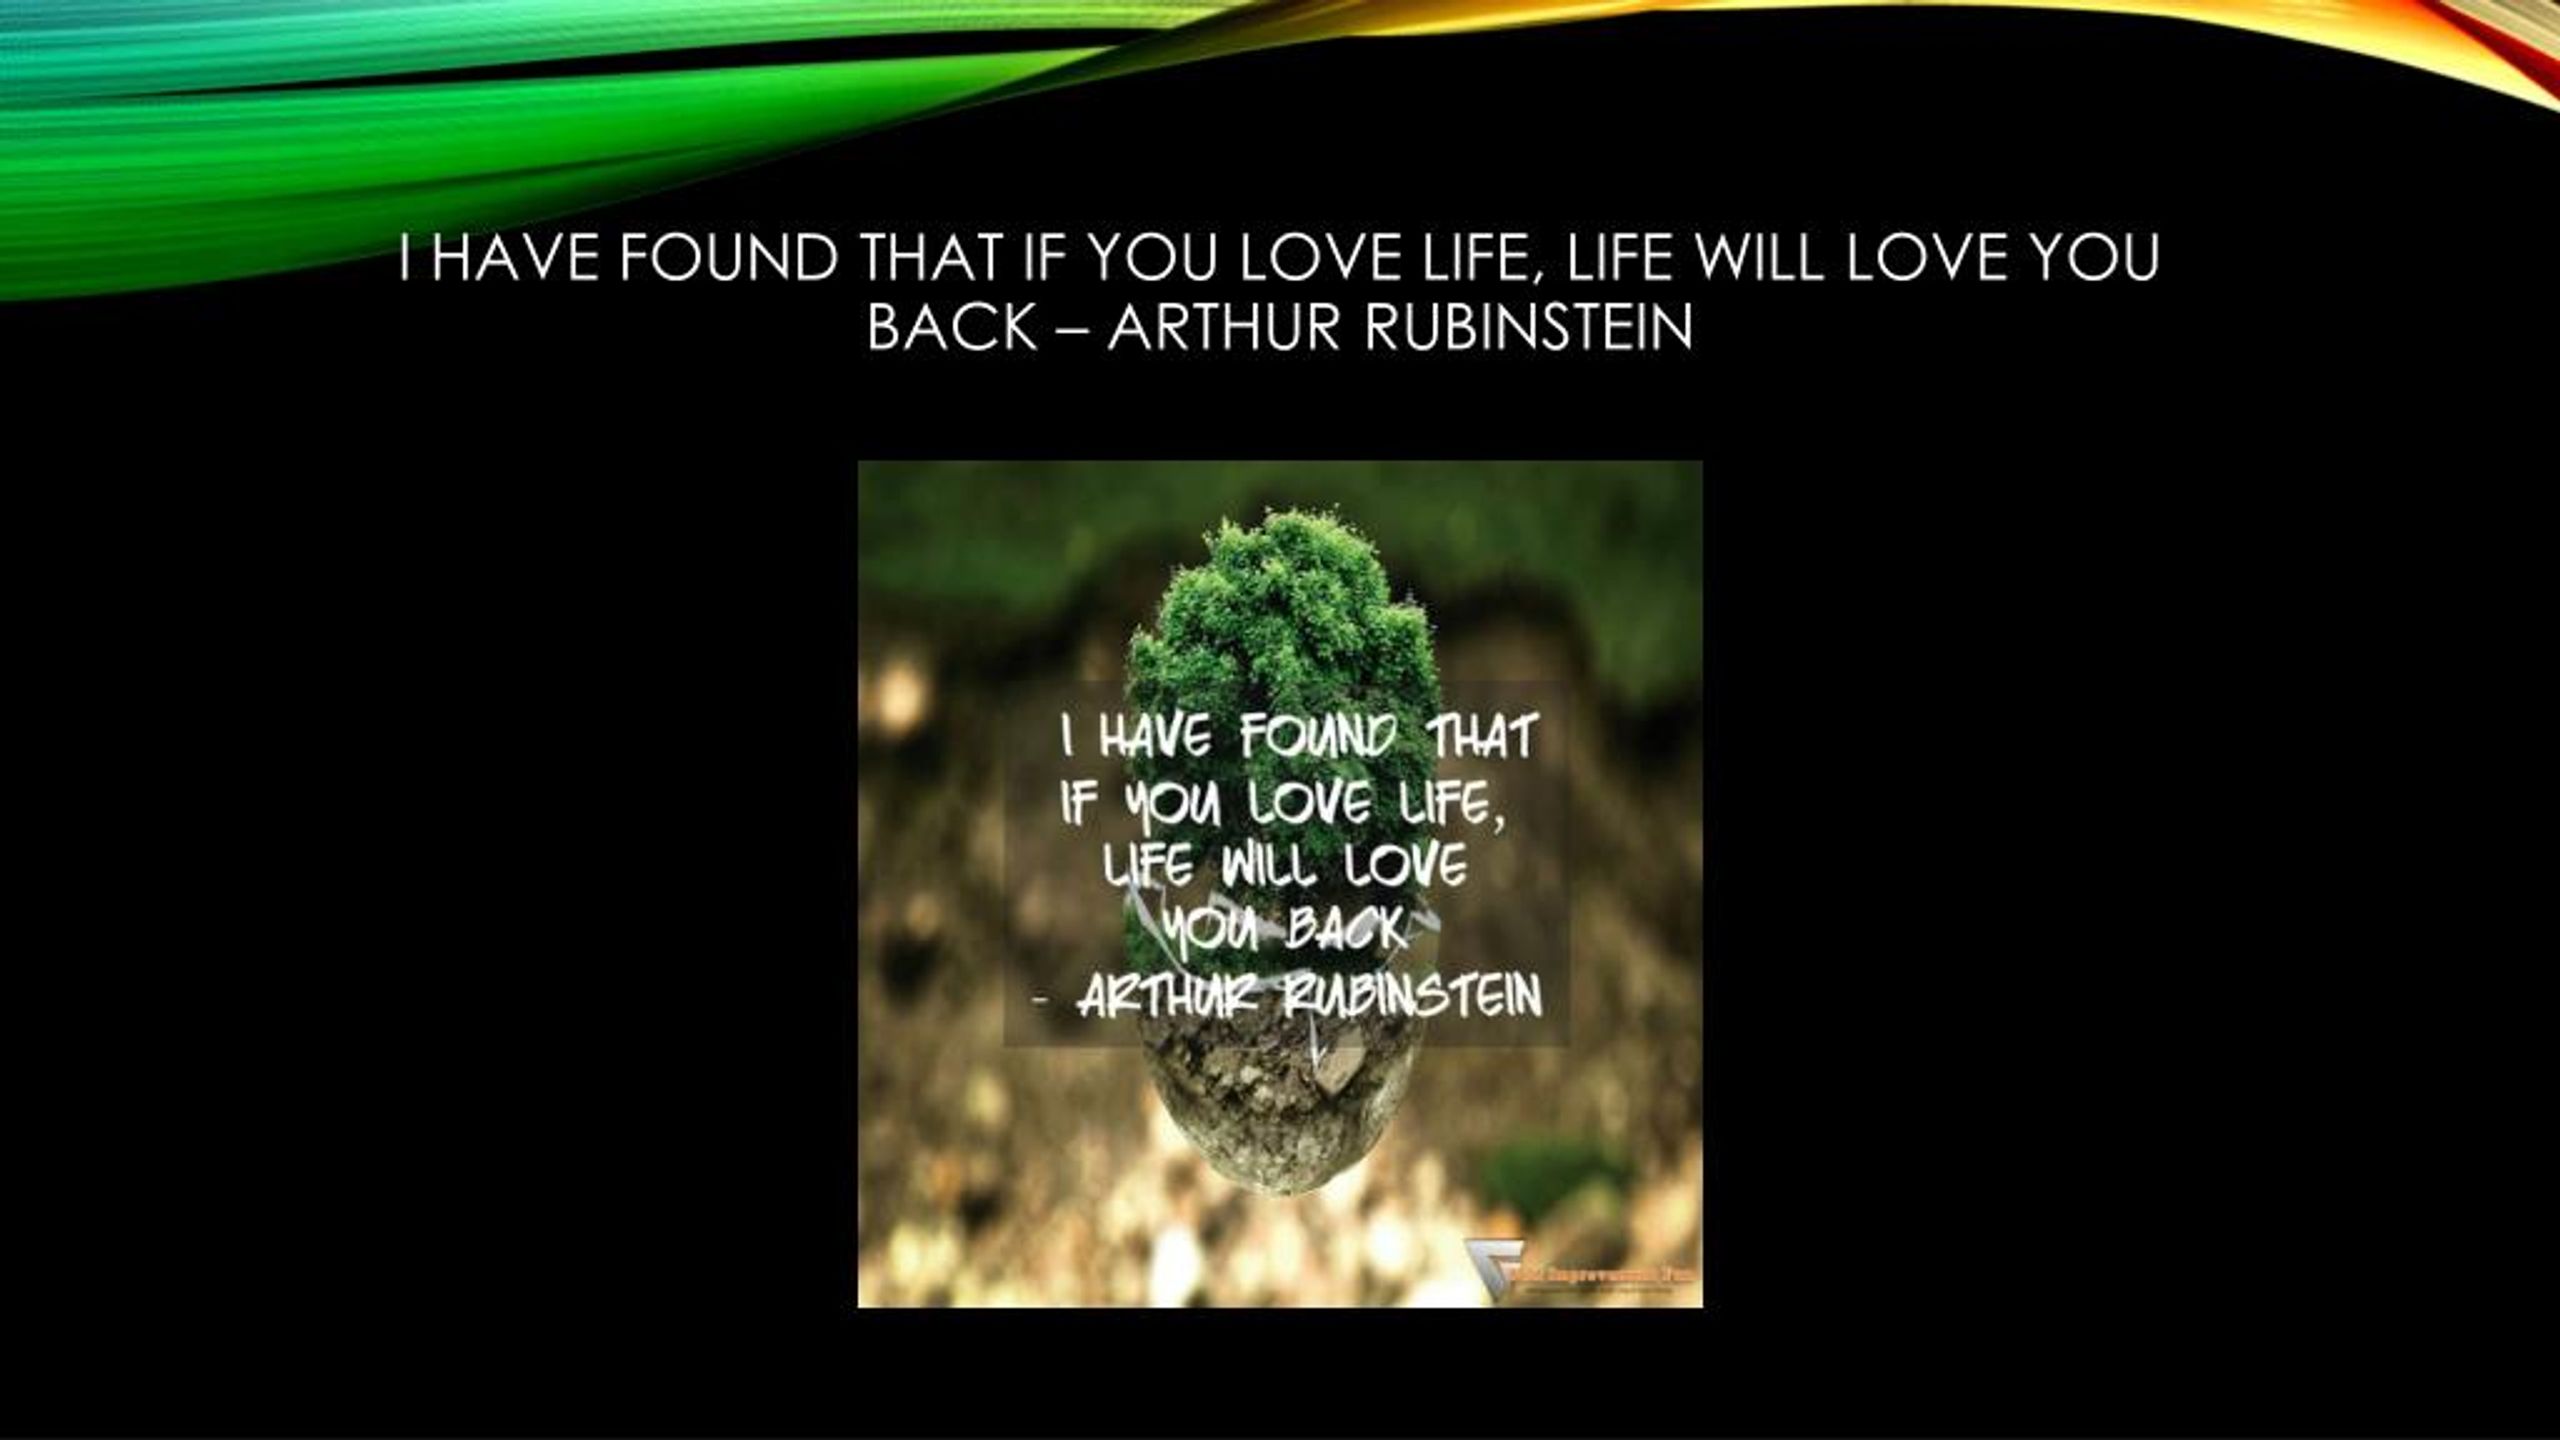 https://image4.slideserve.com/7790506/i-have-found-that-if-you-love-life-life-will-love-you-back-arthur-rubinstein-l.jpg